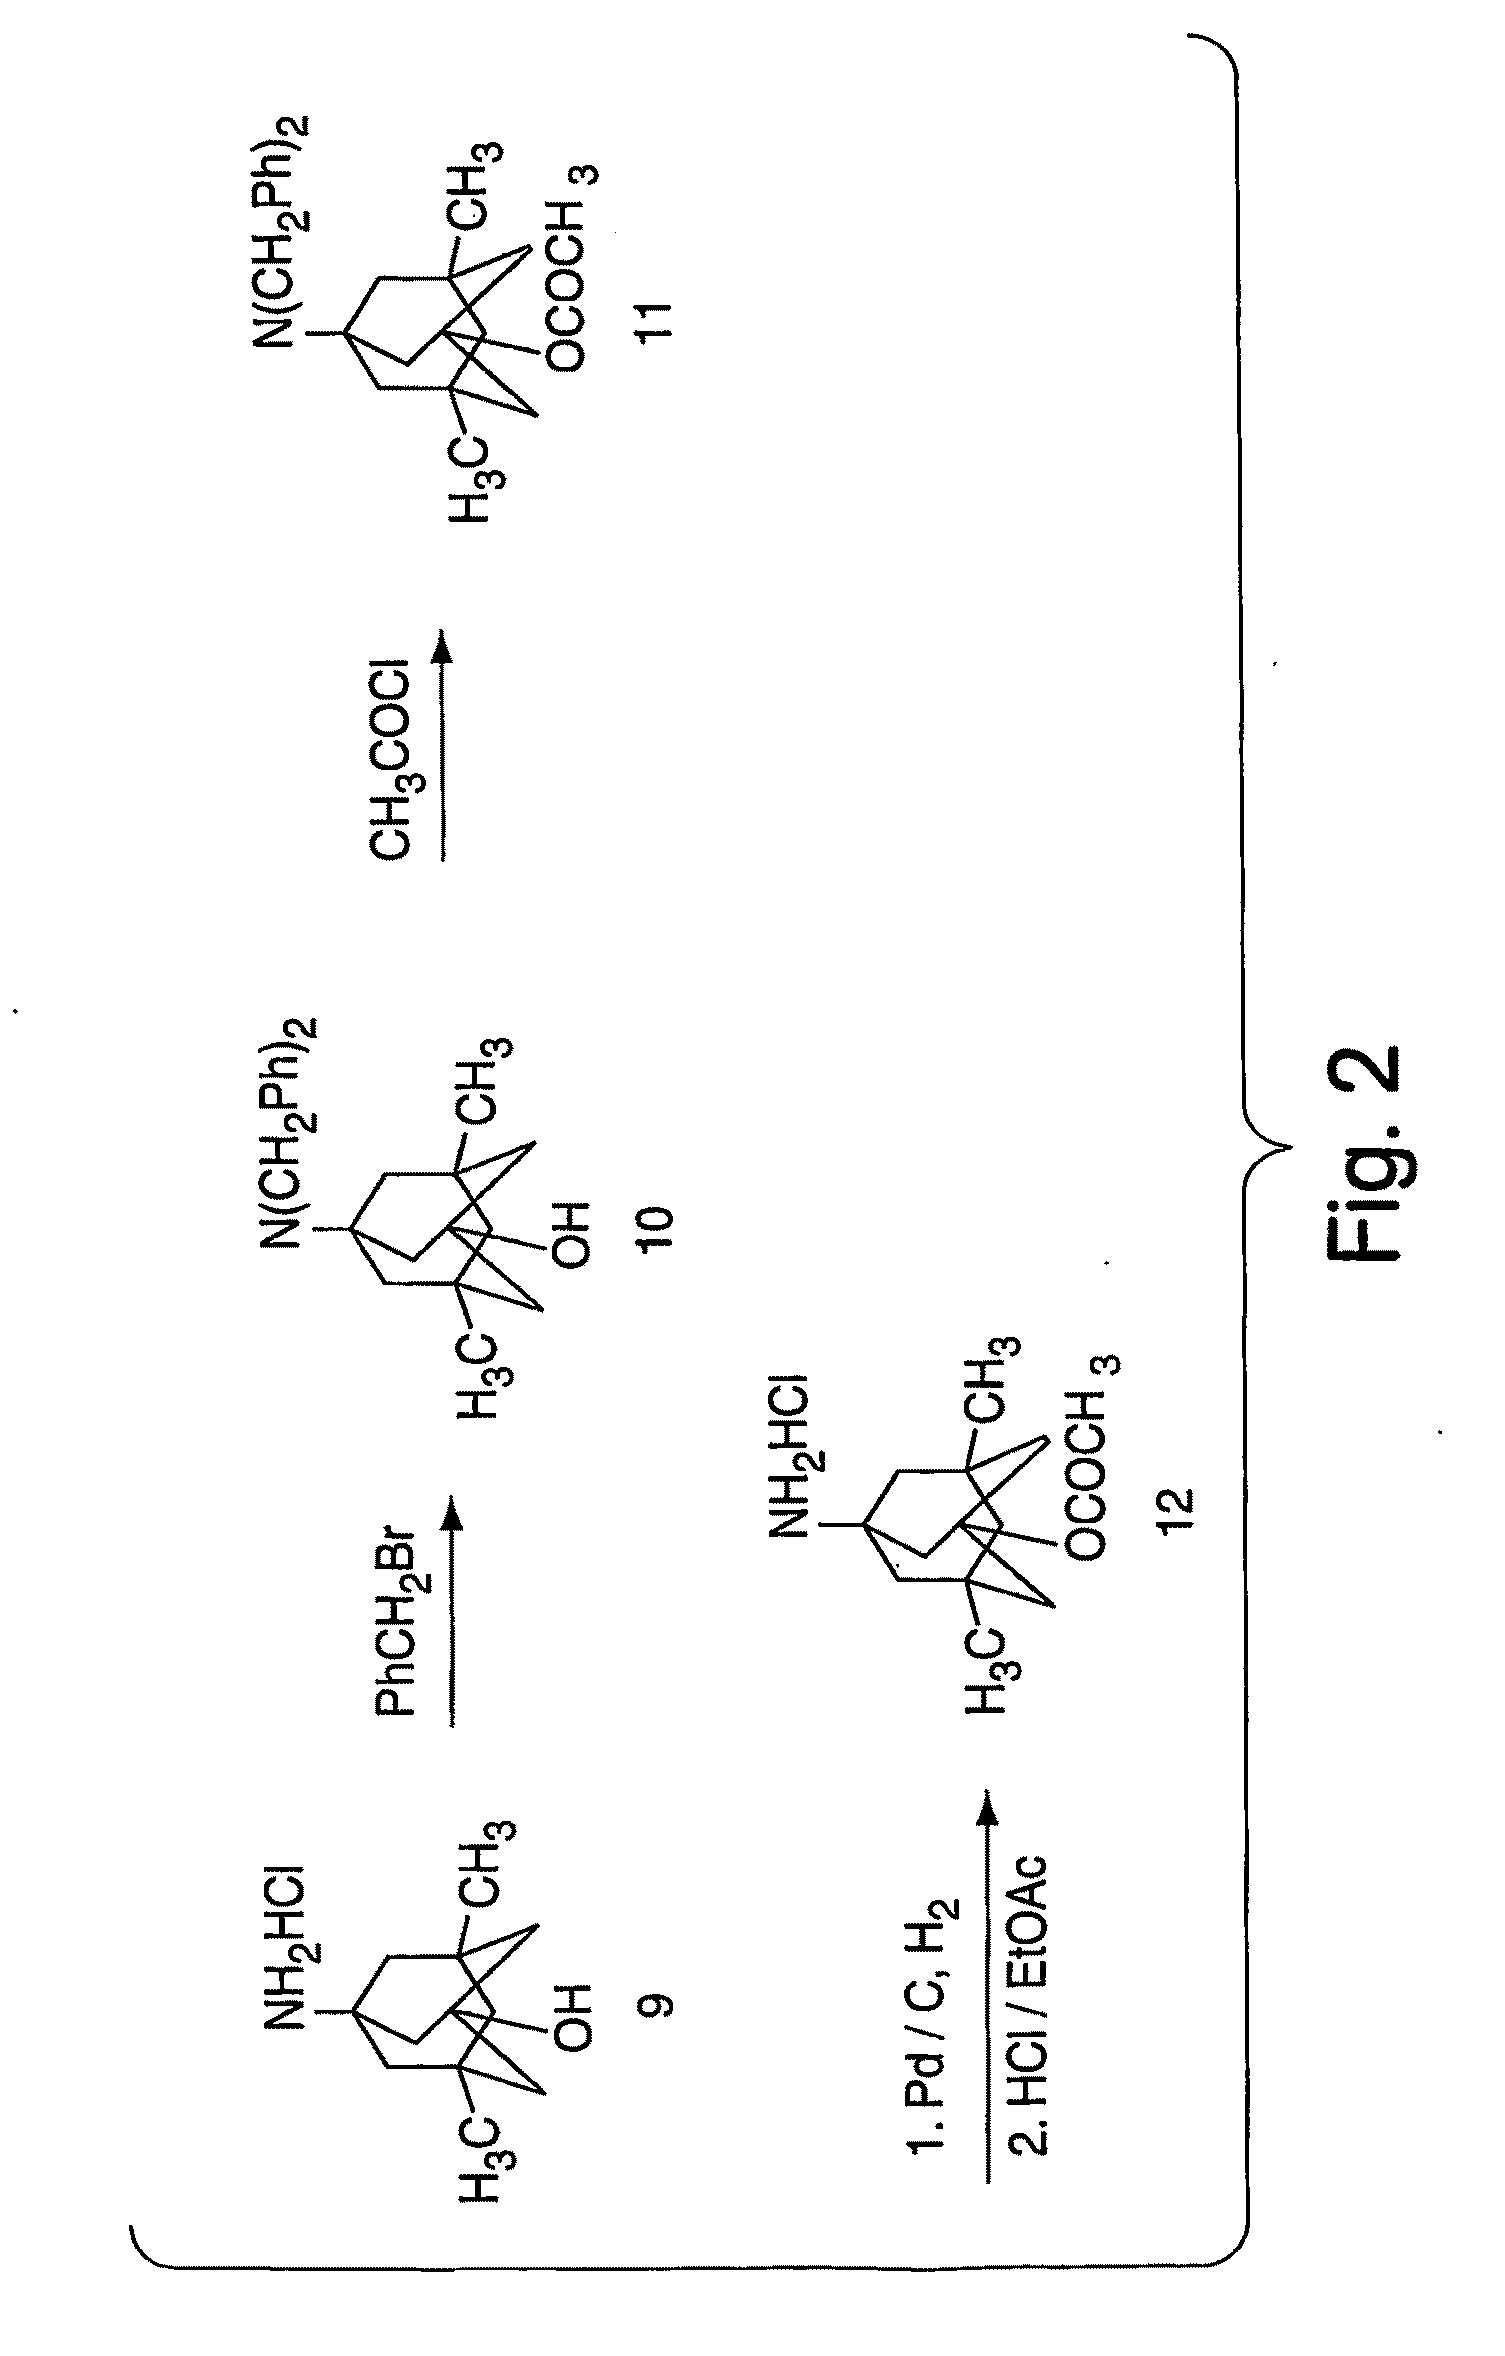 Methods for Treating Neuropsychiatric Disorders with NMDA Receptor Antagonists